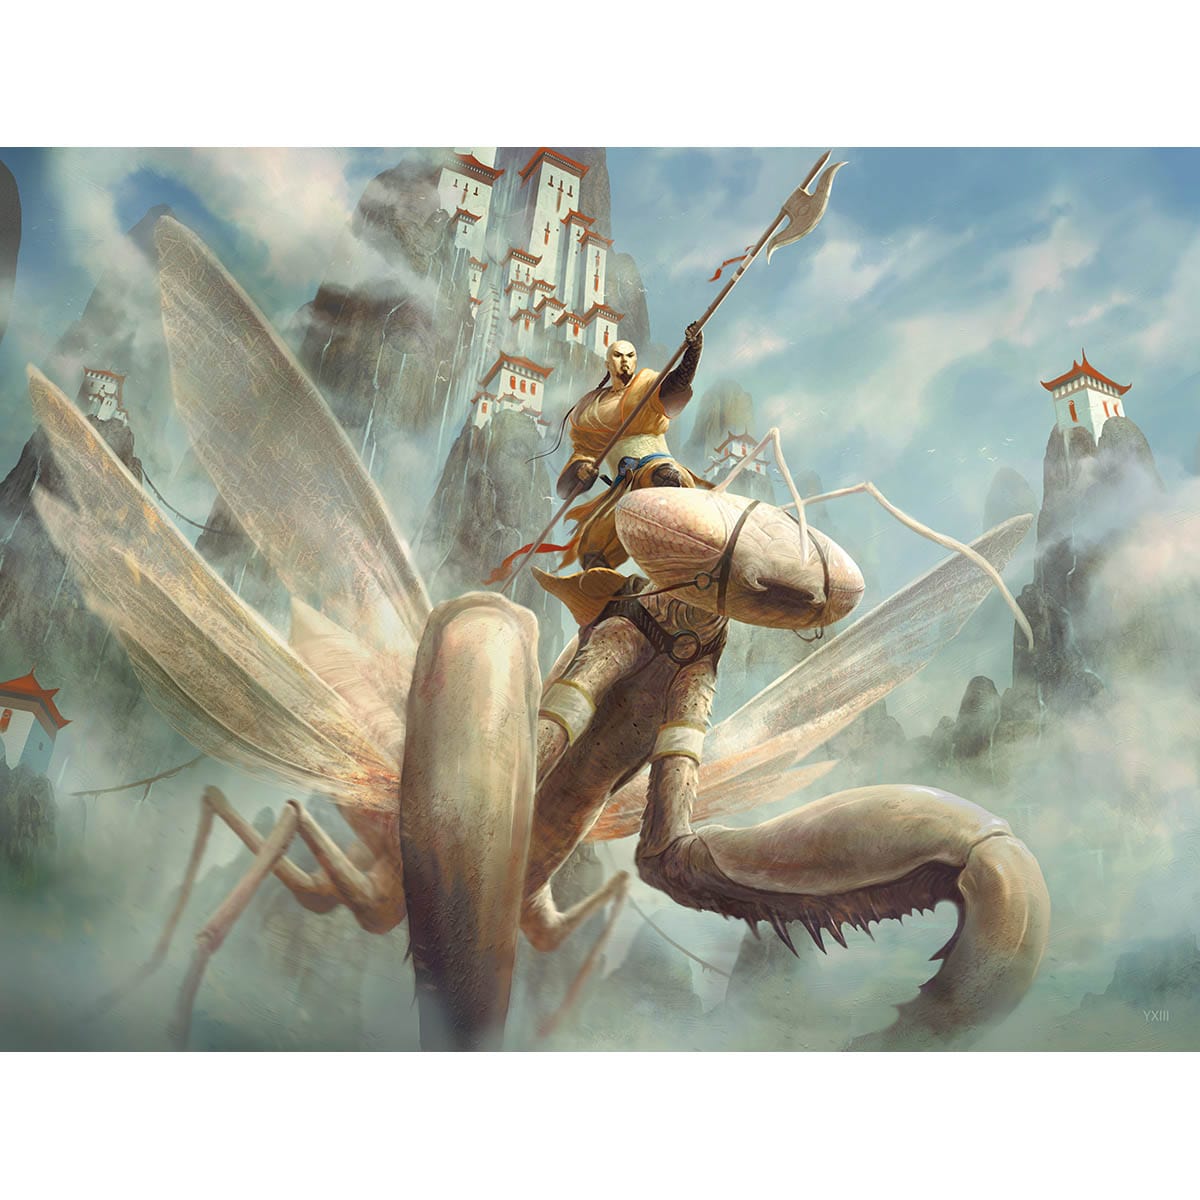 Mantis Rider Print - Print - Original Magic Art - Accessories for Magic the Gathering and other card games